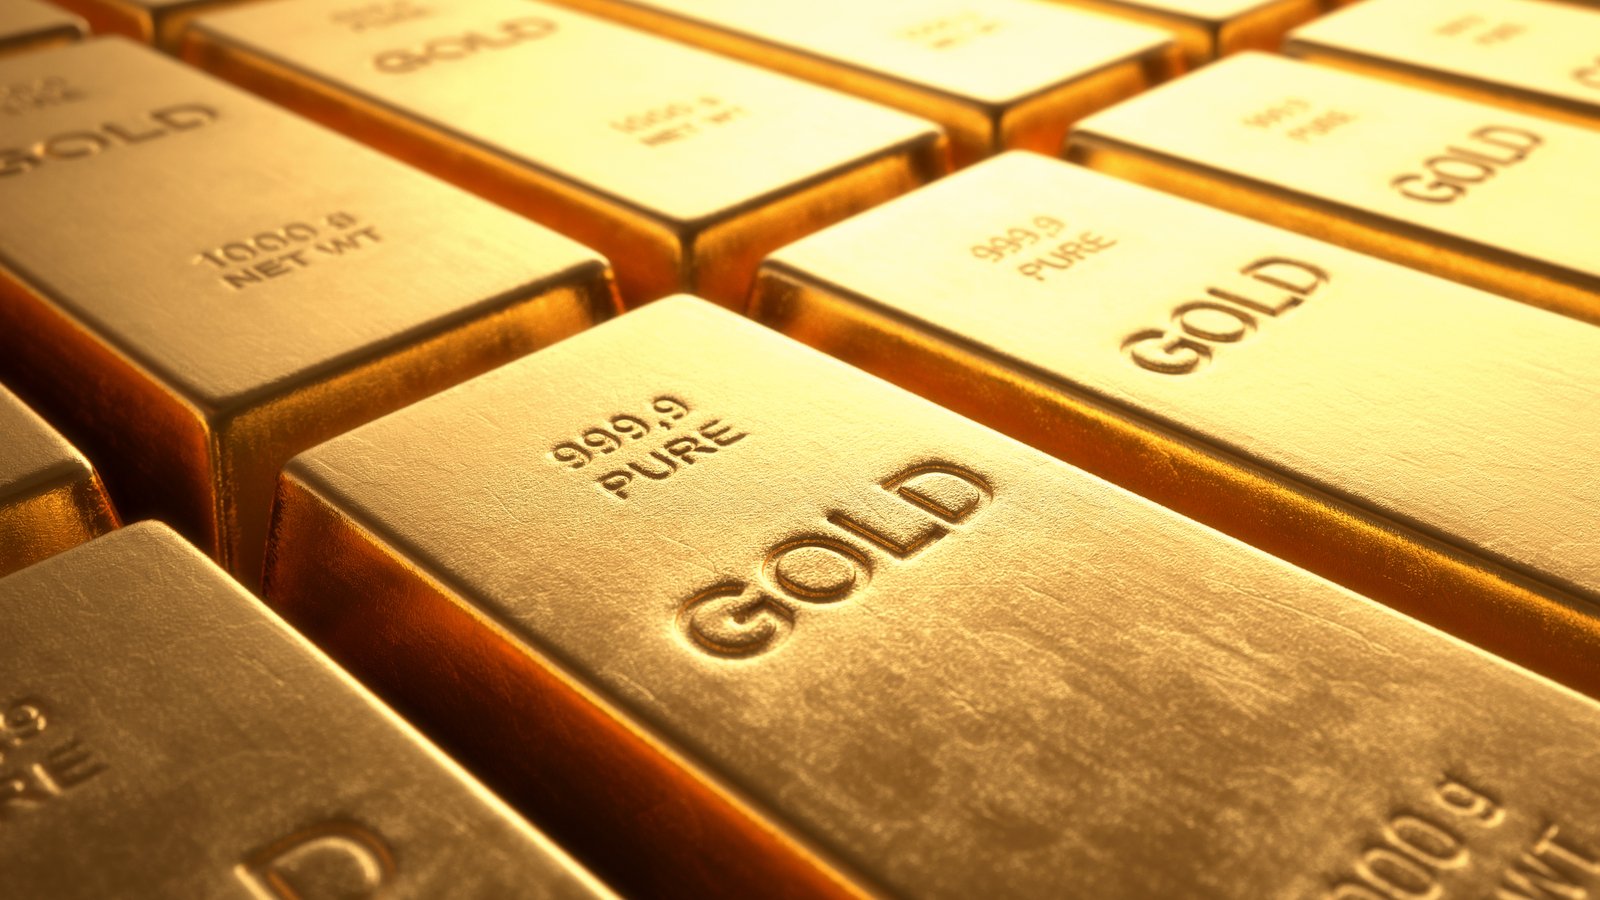 An image of multiple gold bars representing AABB stock.